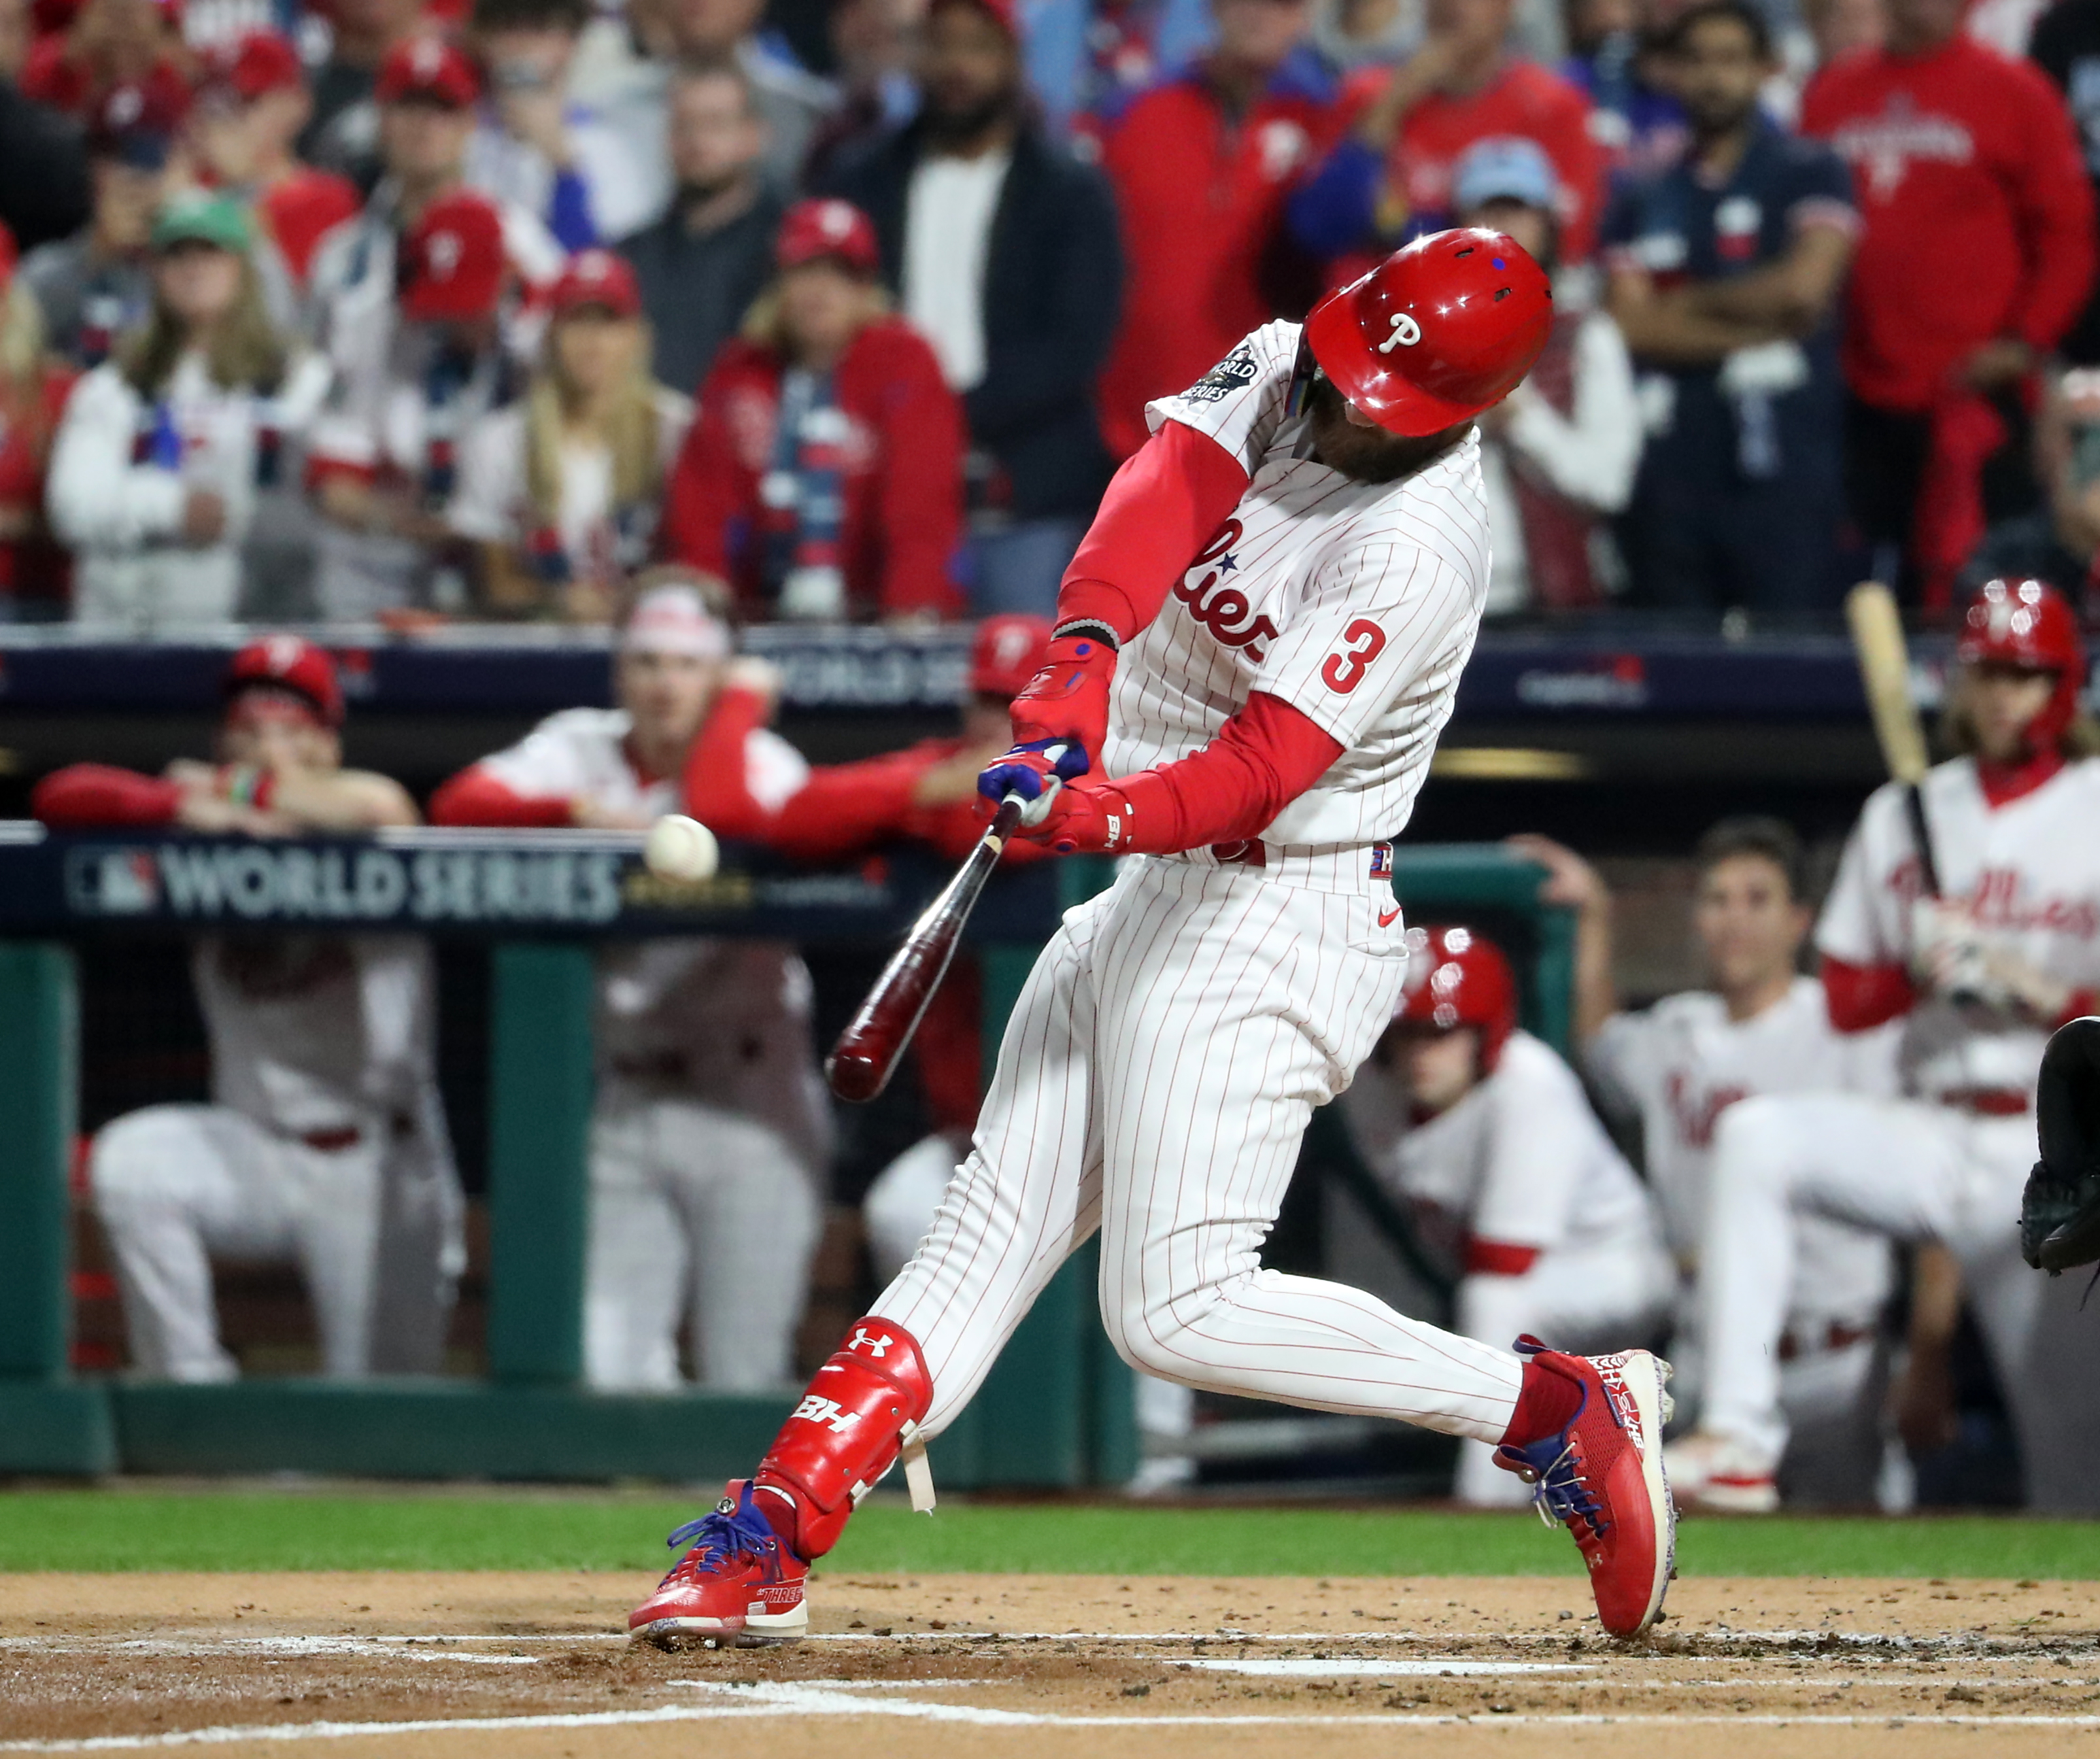 Bryce Harper (3) of the Philadelphia Phillies hits a 2-run home run in the first inning during World Series Game 3 against the Houston Astros at Citizens Bank Park, Tuesday, Nov. 1, 2022.